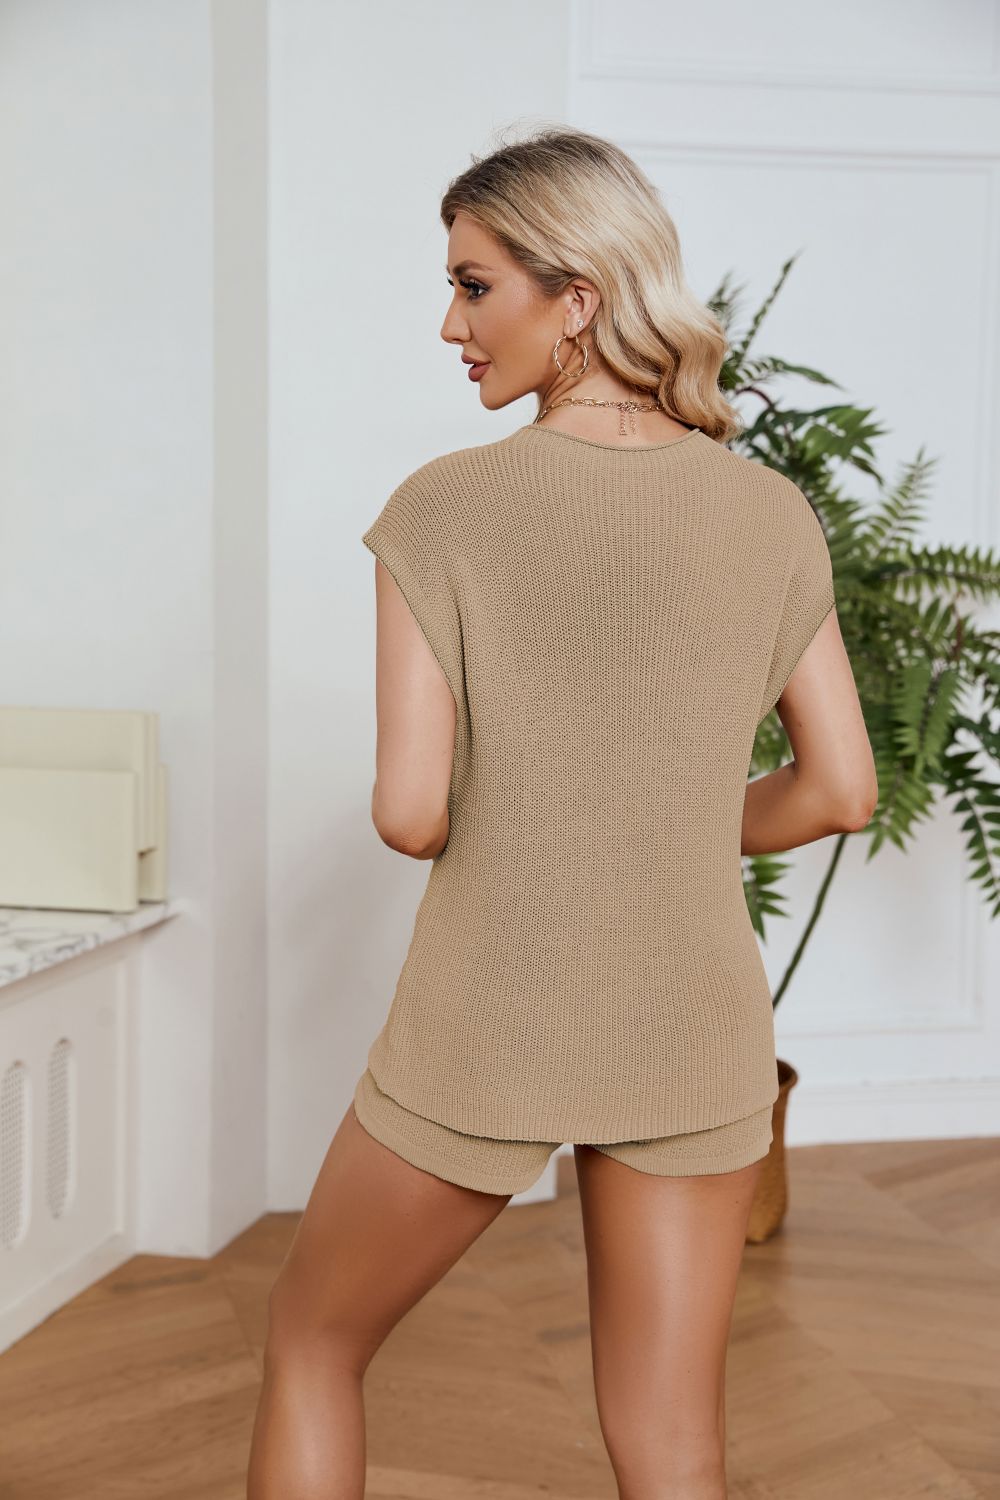 Ribbed Round Neck Pocket Knit Top and Shorts Set - Fashion Girl Online Store